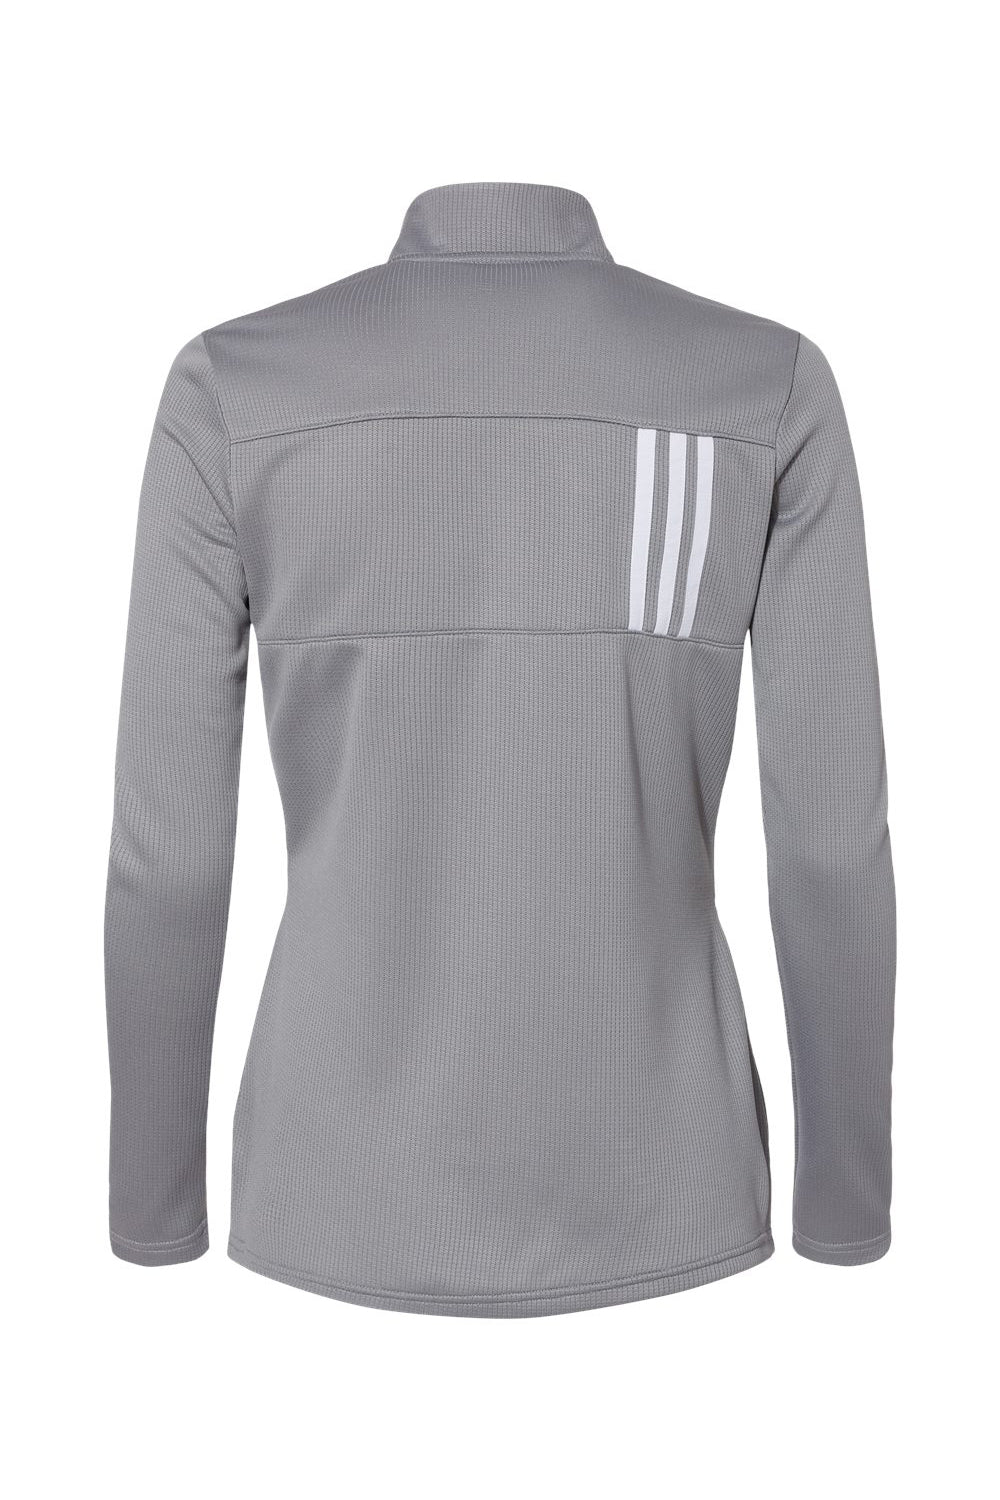 Adidas A483 Womens 3 Stripes Double Knit 1/4 Zip Pullover Grey/White Flat Back